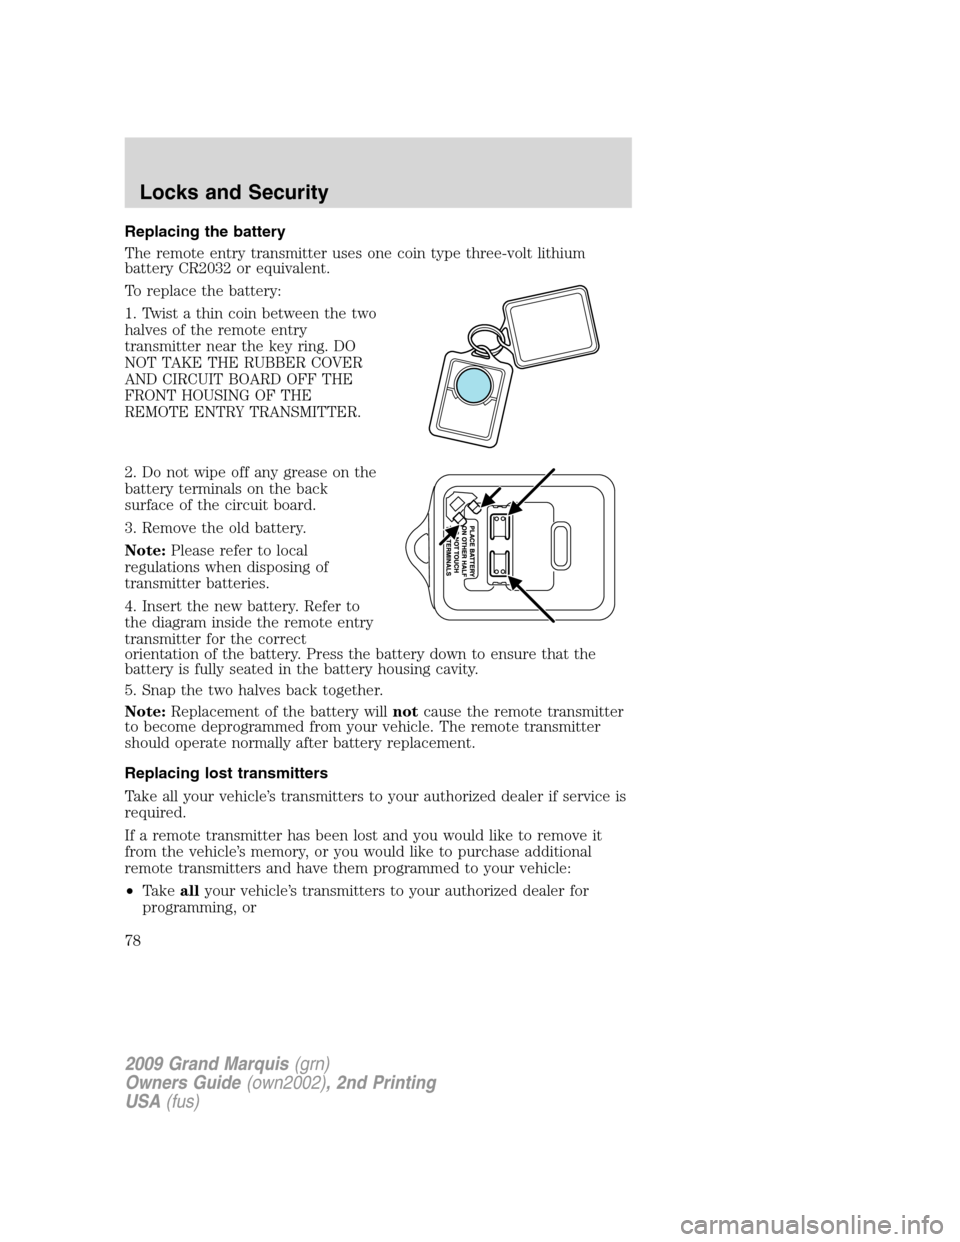 Mercury Grand Marquis 2009  s Manual PDF Replacing the battery
The remote entry transmitter uses one coin type three-volt lithium
battery CR2032 or equivalent.
To replace the battery:
1. Twist a thin coin between the two
halves of the remote